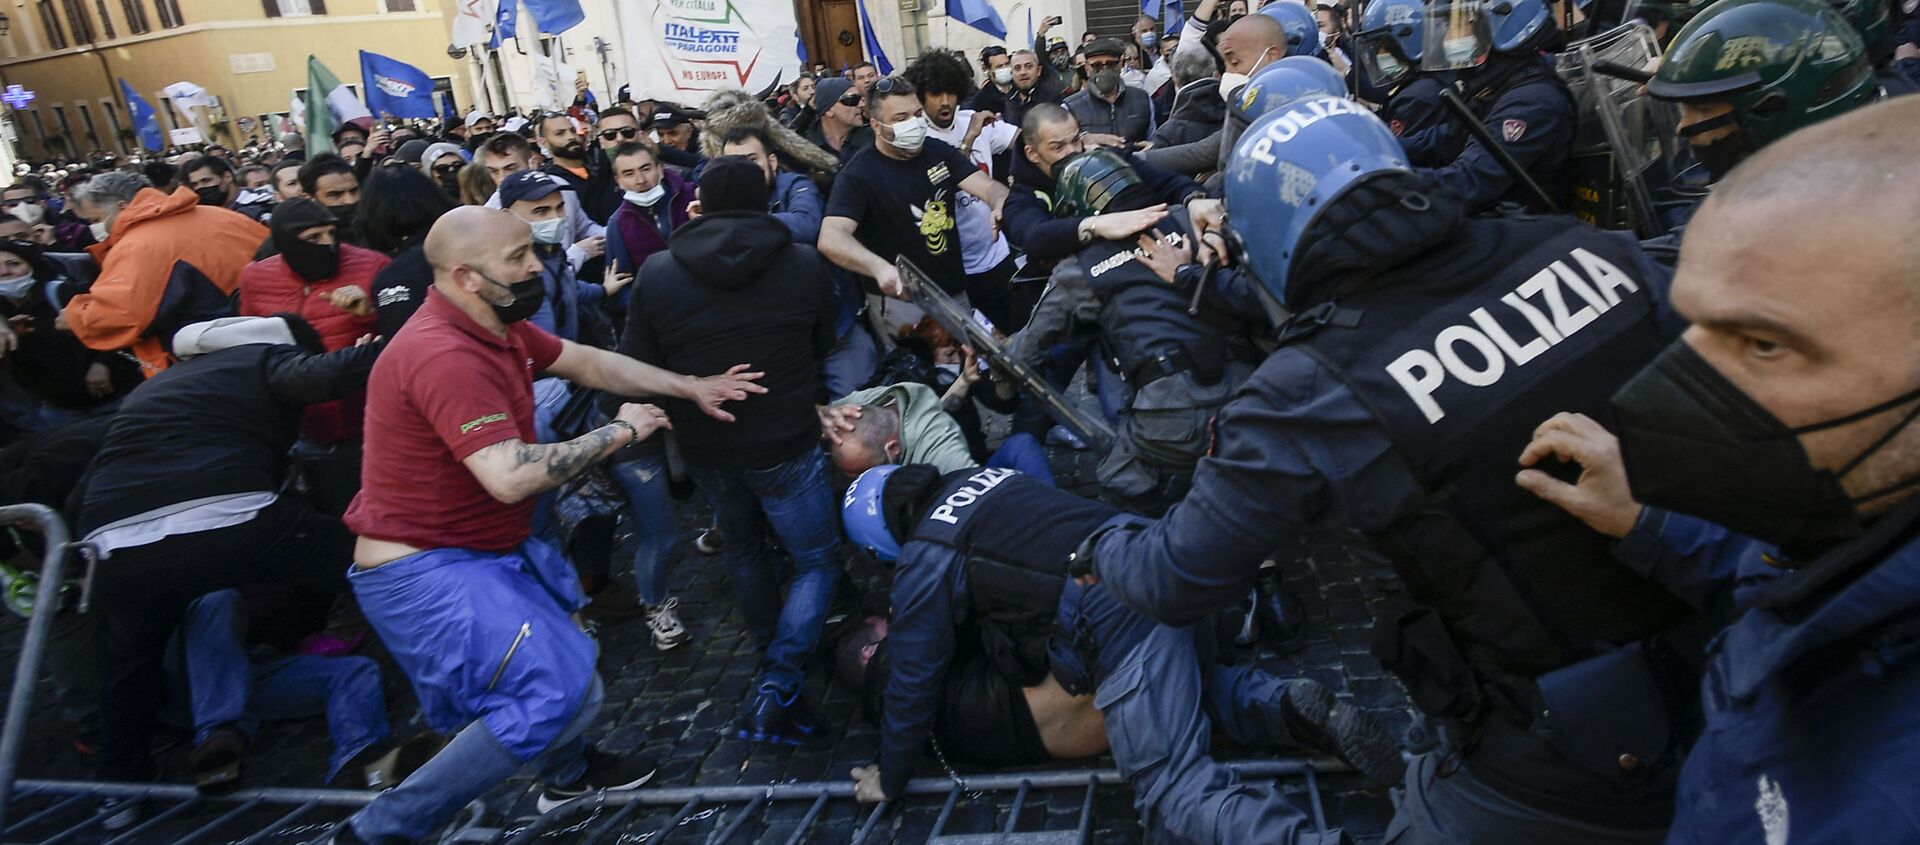 Protesters (L) skirmish with anti-riot policemen as they take part in a demonstration of restaurant owners, entrepreneurs and small businesses owners on April 6, 2021 outside parliament on Piazza Montecitorio in Rome, to protest against closures and against Italy's Health minister, during the Covid-19 coronavirus pandemic. - Sputnik International, 1920